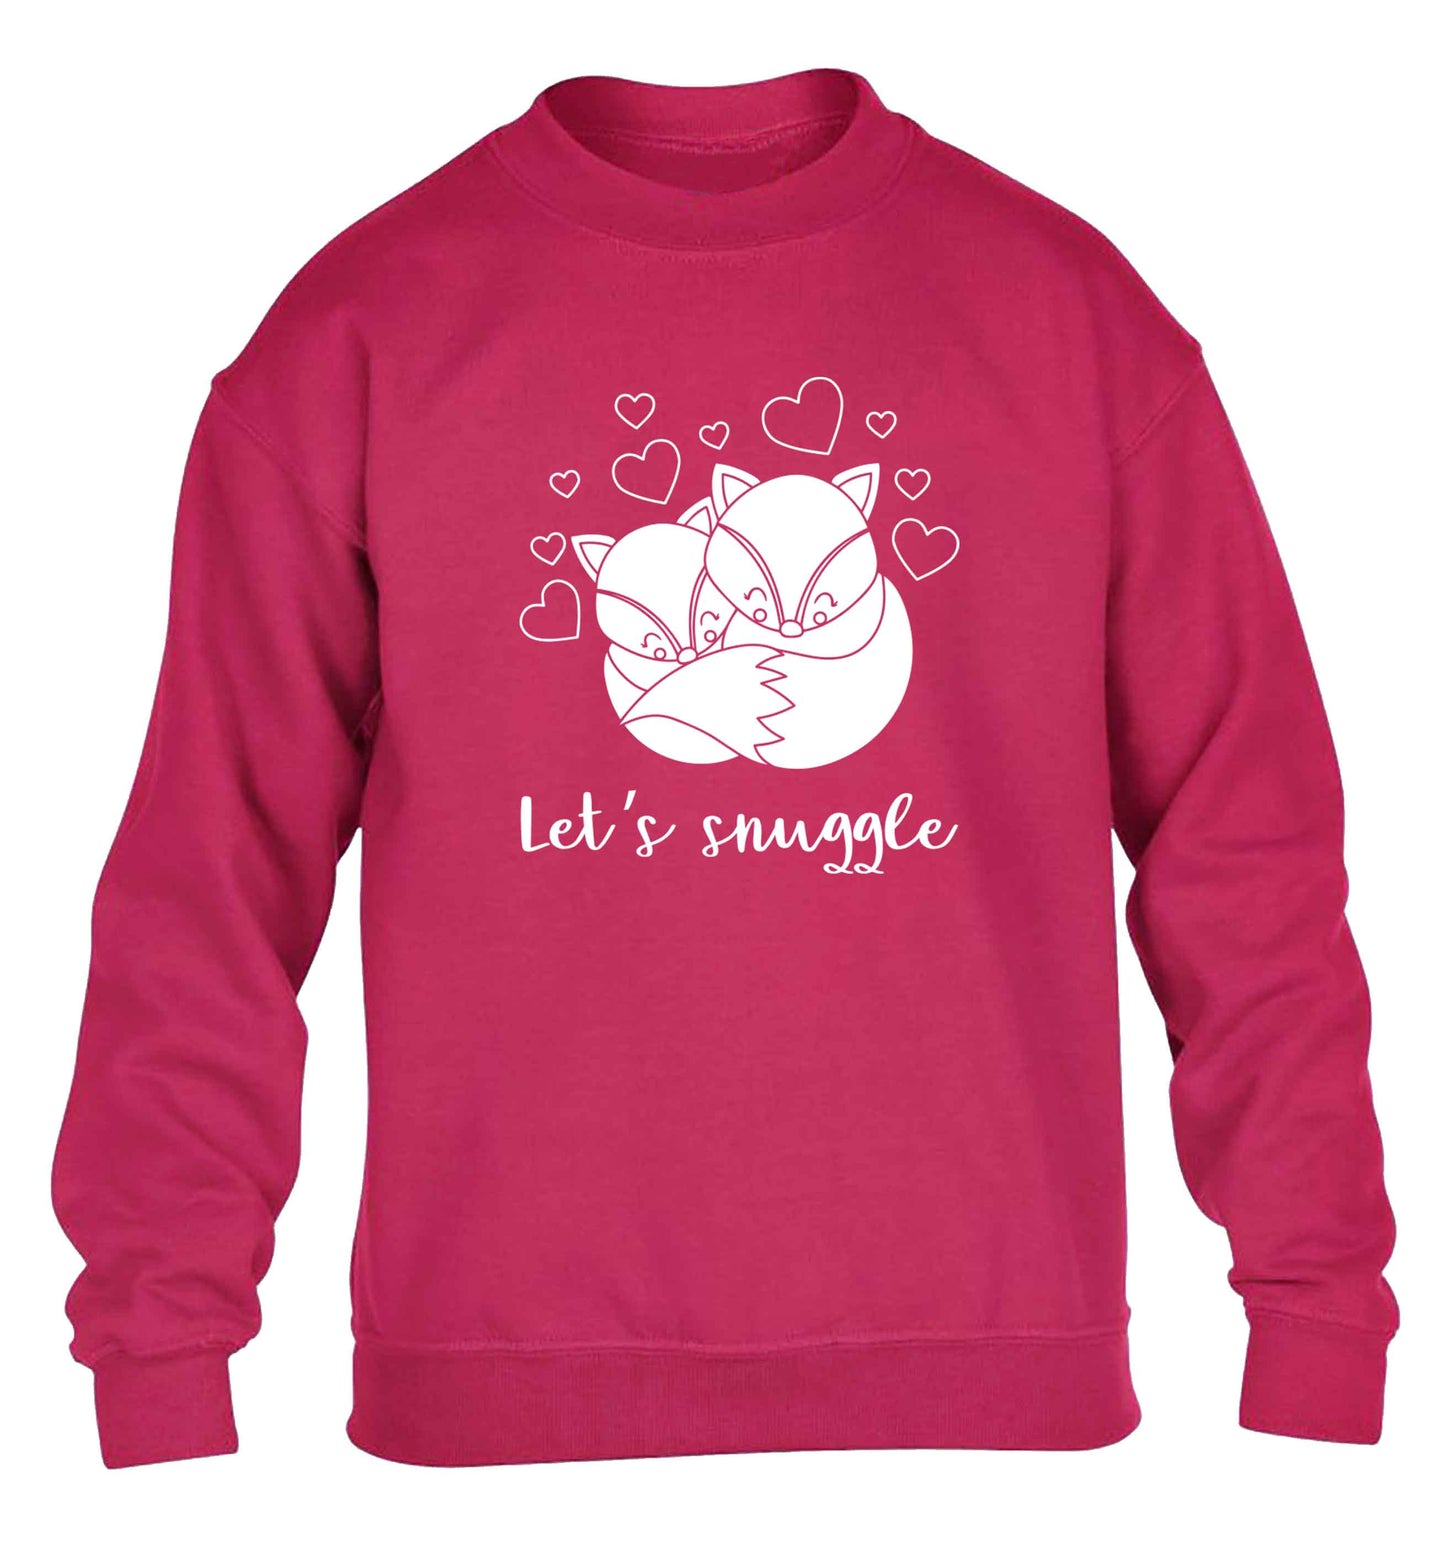 Let's snuggle children's pink sweater 12-13 Years